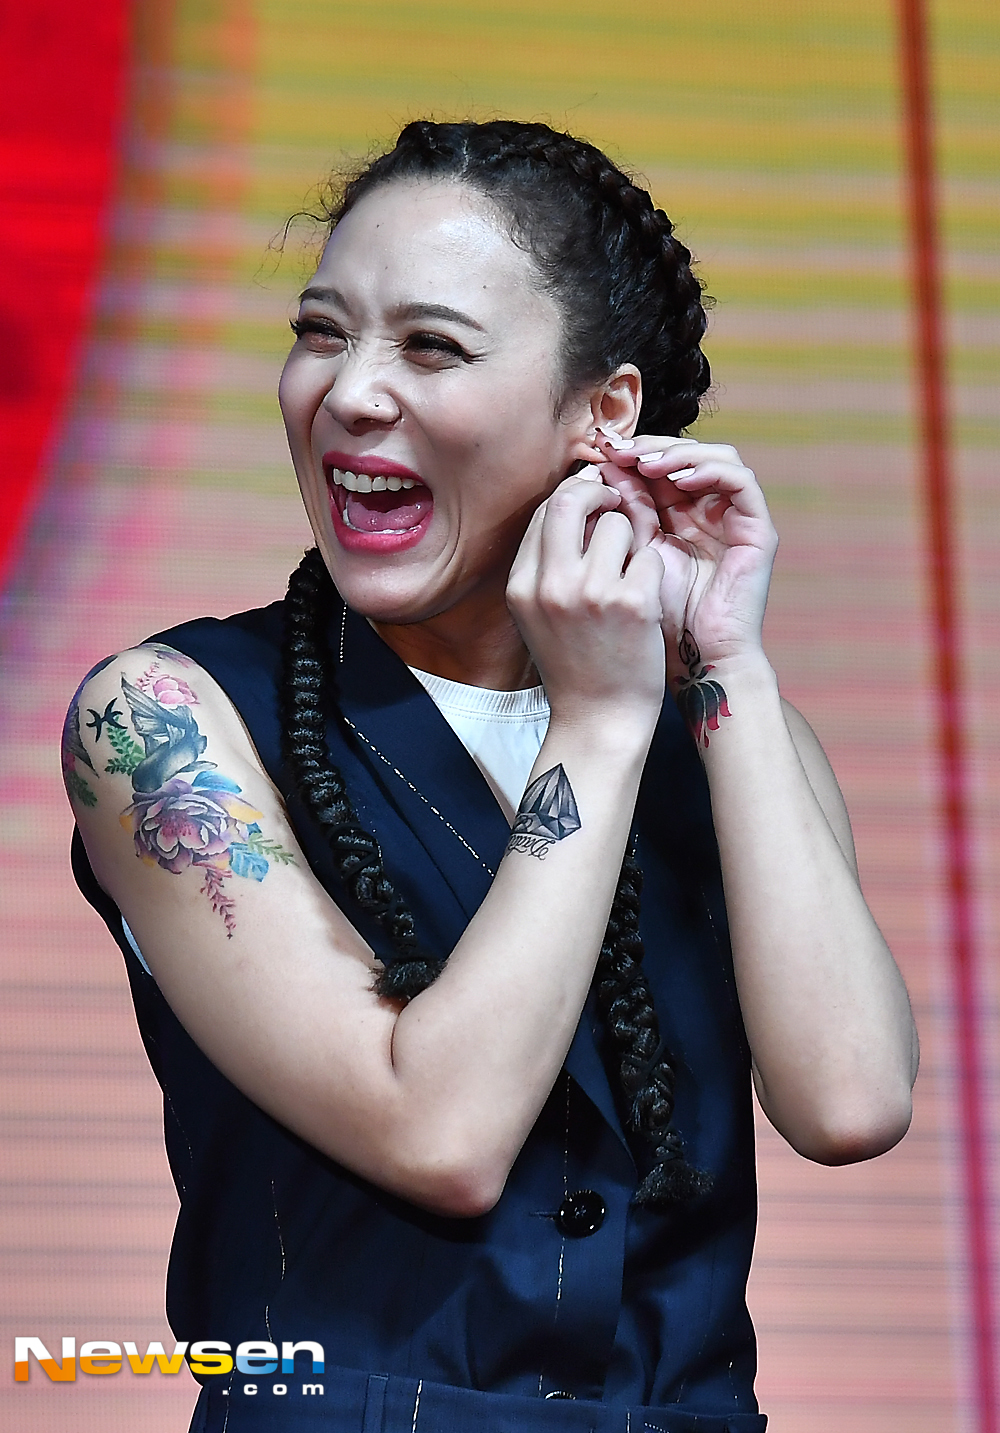 The concert commemorating the release of the Yoon Mi-rae solo album was held at Yes24 Live Hall in Gwangjang-dong, Gwangjin-gu, Seoul on July 5On this day, Yoon Mi-rae is fixing Earring among Concert.Meanwhile, Yoon Mi-rae will show the first stage of Yu and Mi on KBS 2 Music Bank on the 6th.It is only nine years since Yoon Mi-rae released a solo album and appeared in the Music ranking program in 2009.expressiveness